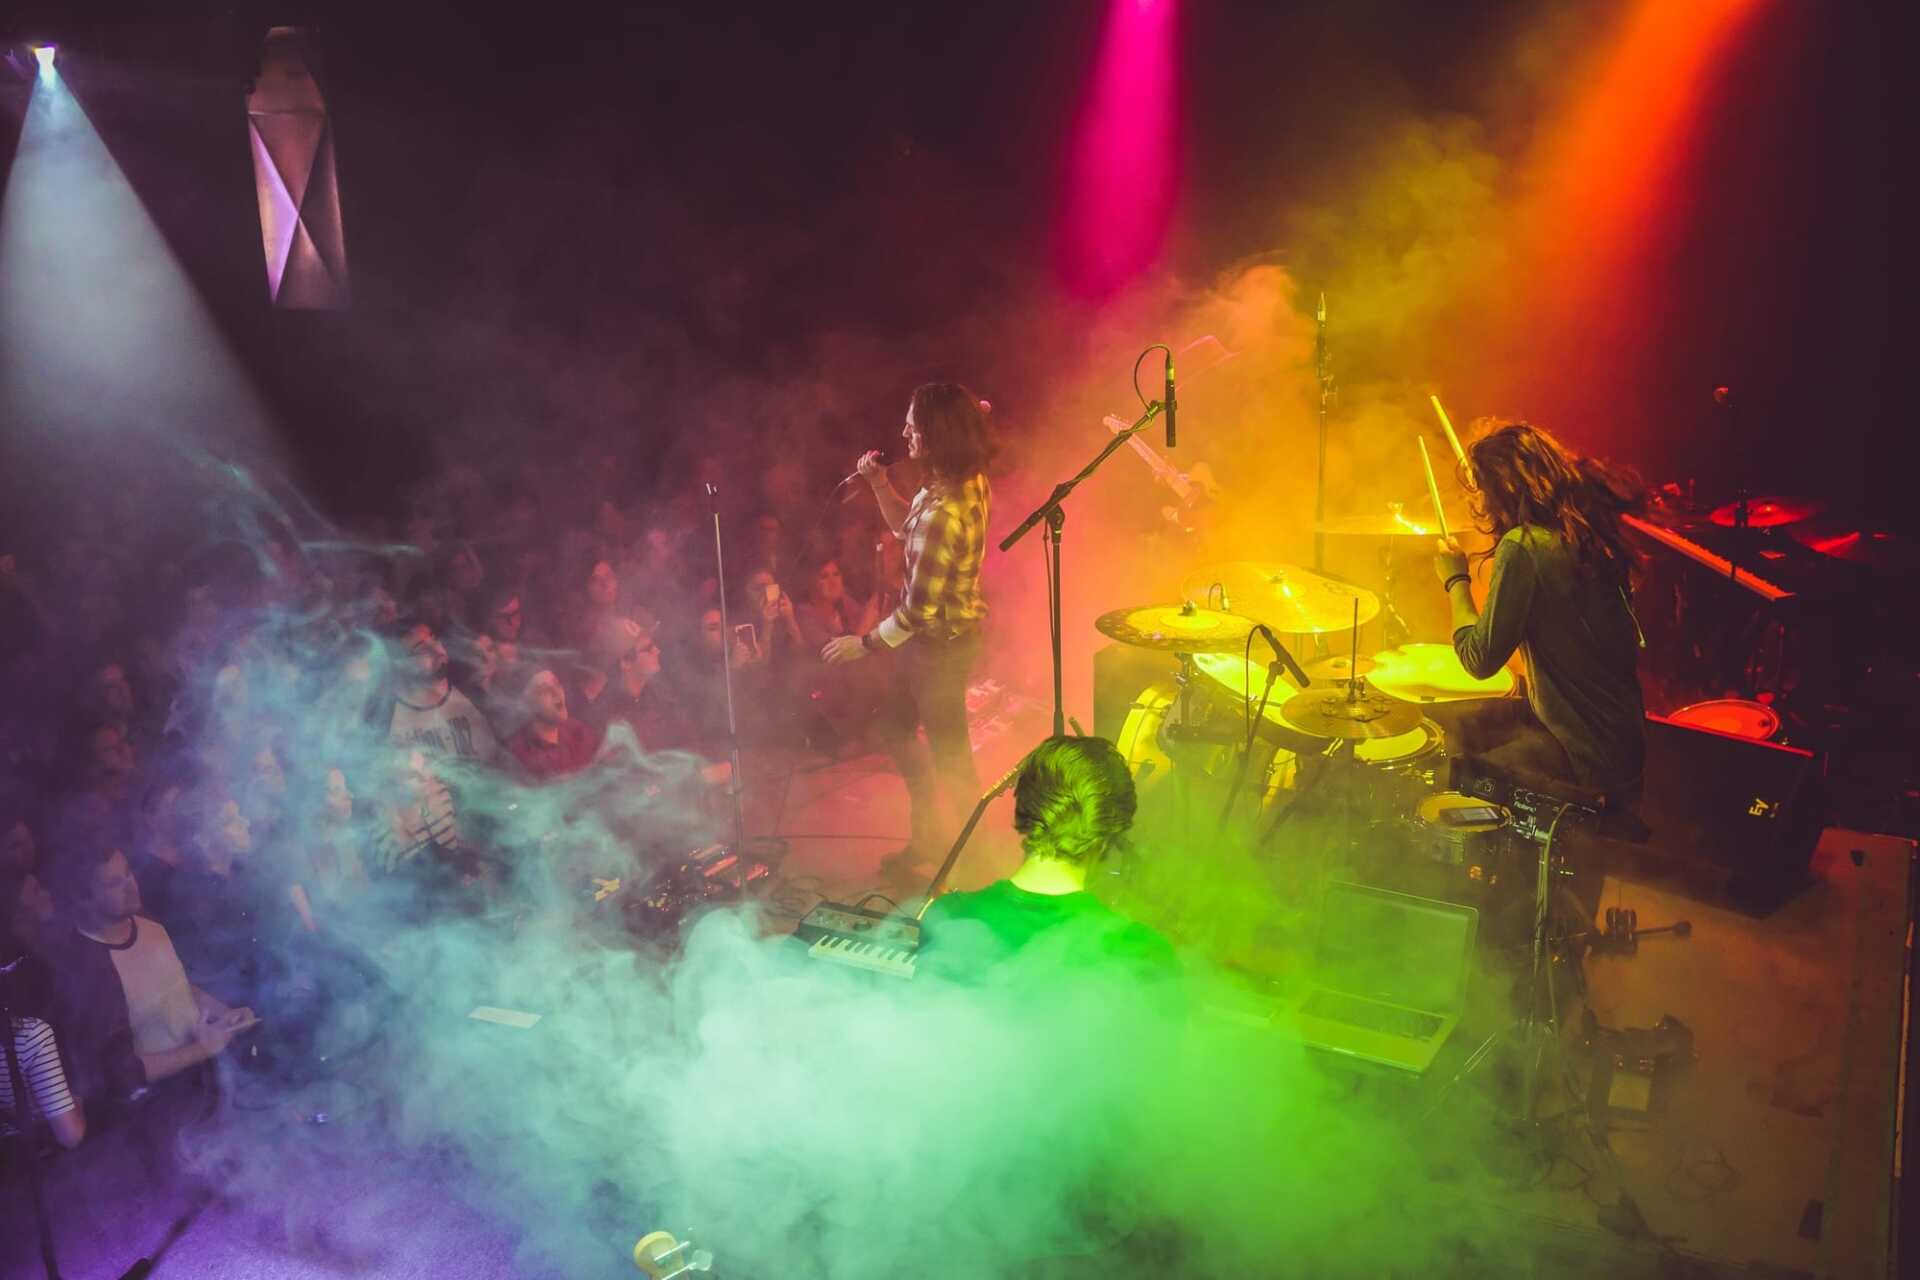 A band performing on stage with rainbow-colored lights flooding them from above